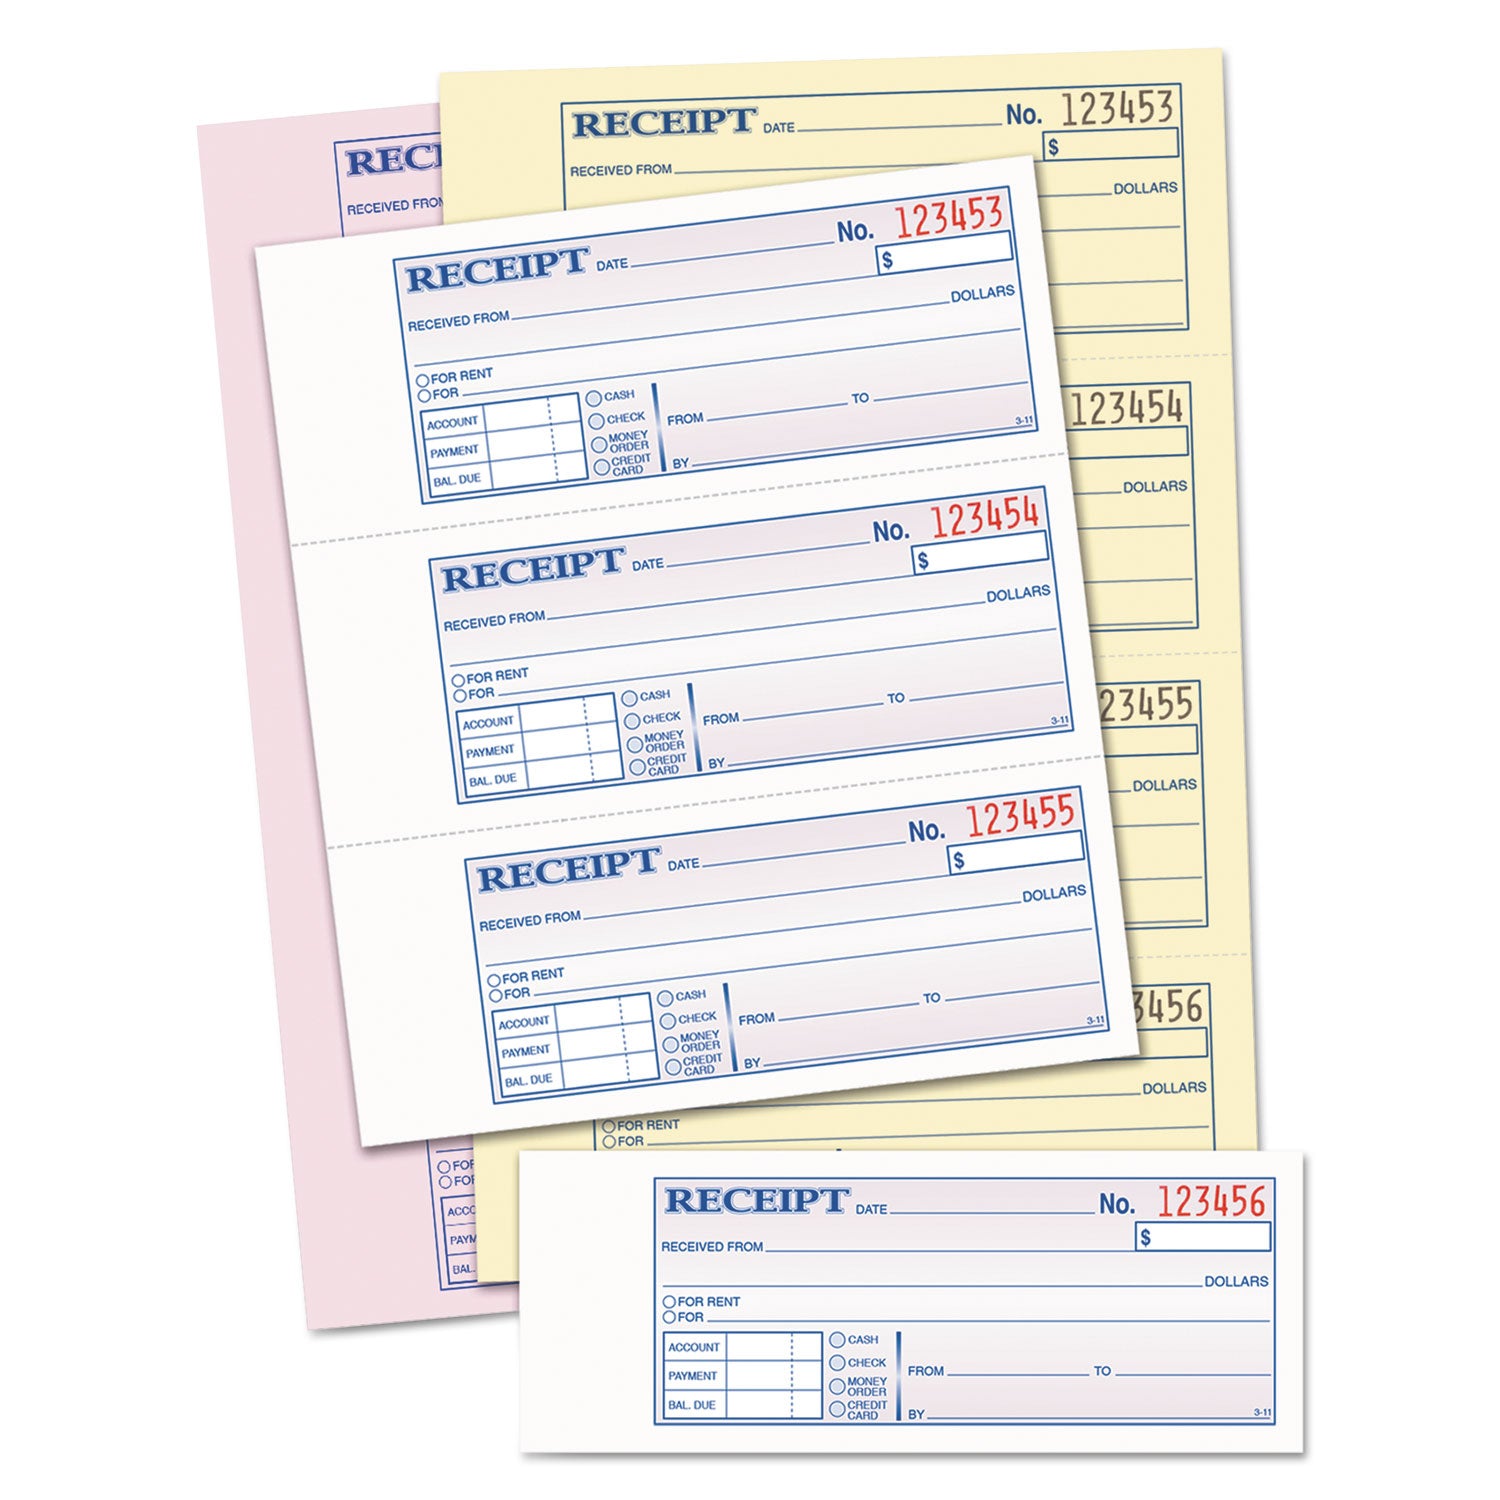 Money and Rent Receipt Book, Account + Payment Sections, Three-Part Carbonless, 7.13 x 2.75, 4 Forms/Sheet, 100 Forms Total - 